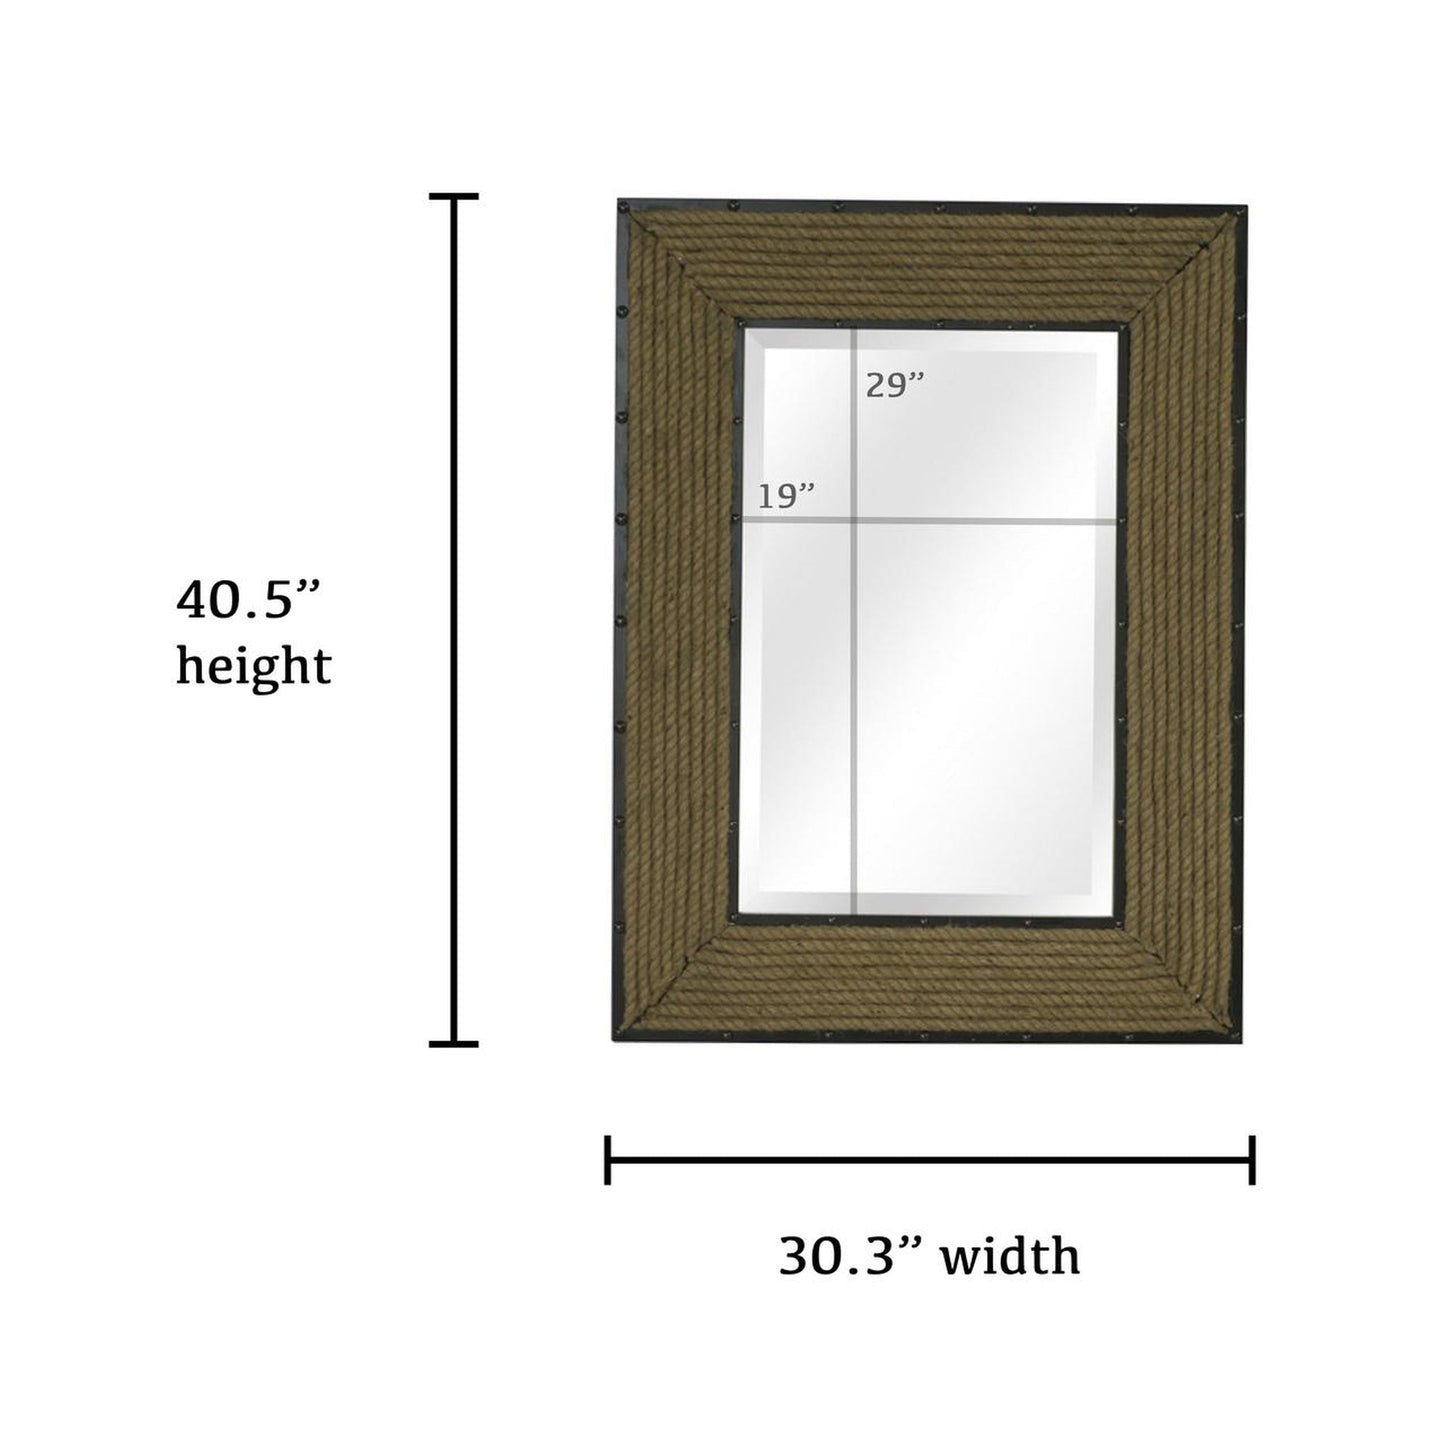 SBC Decor Newport Rope 30" x 40" Wall-Mounted Wood Frame Rectangle Wall Mirror In Matte Black Finish